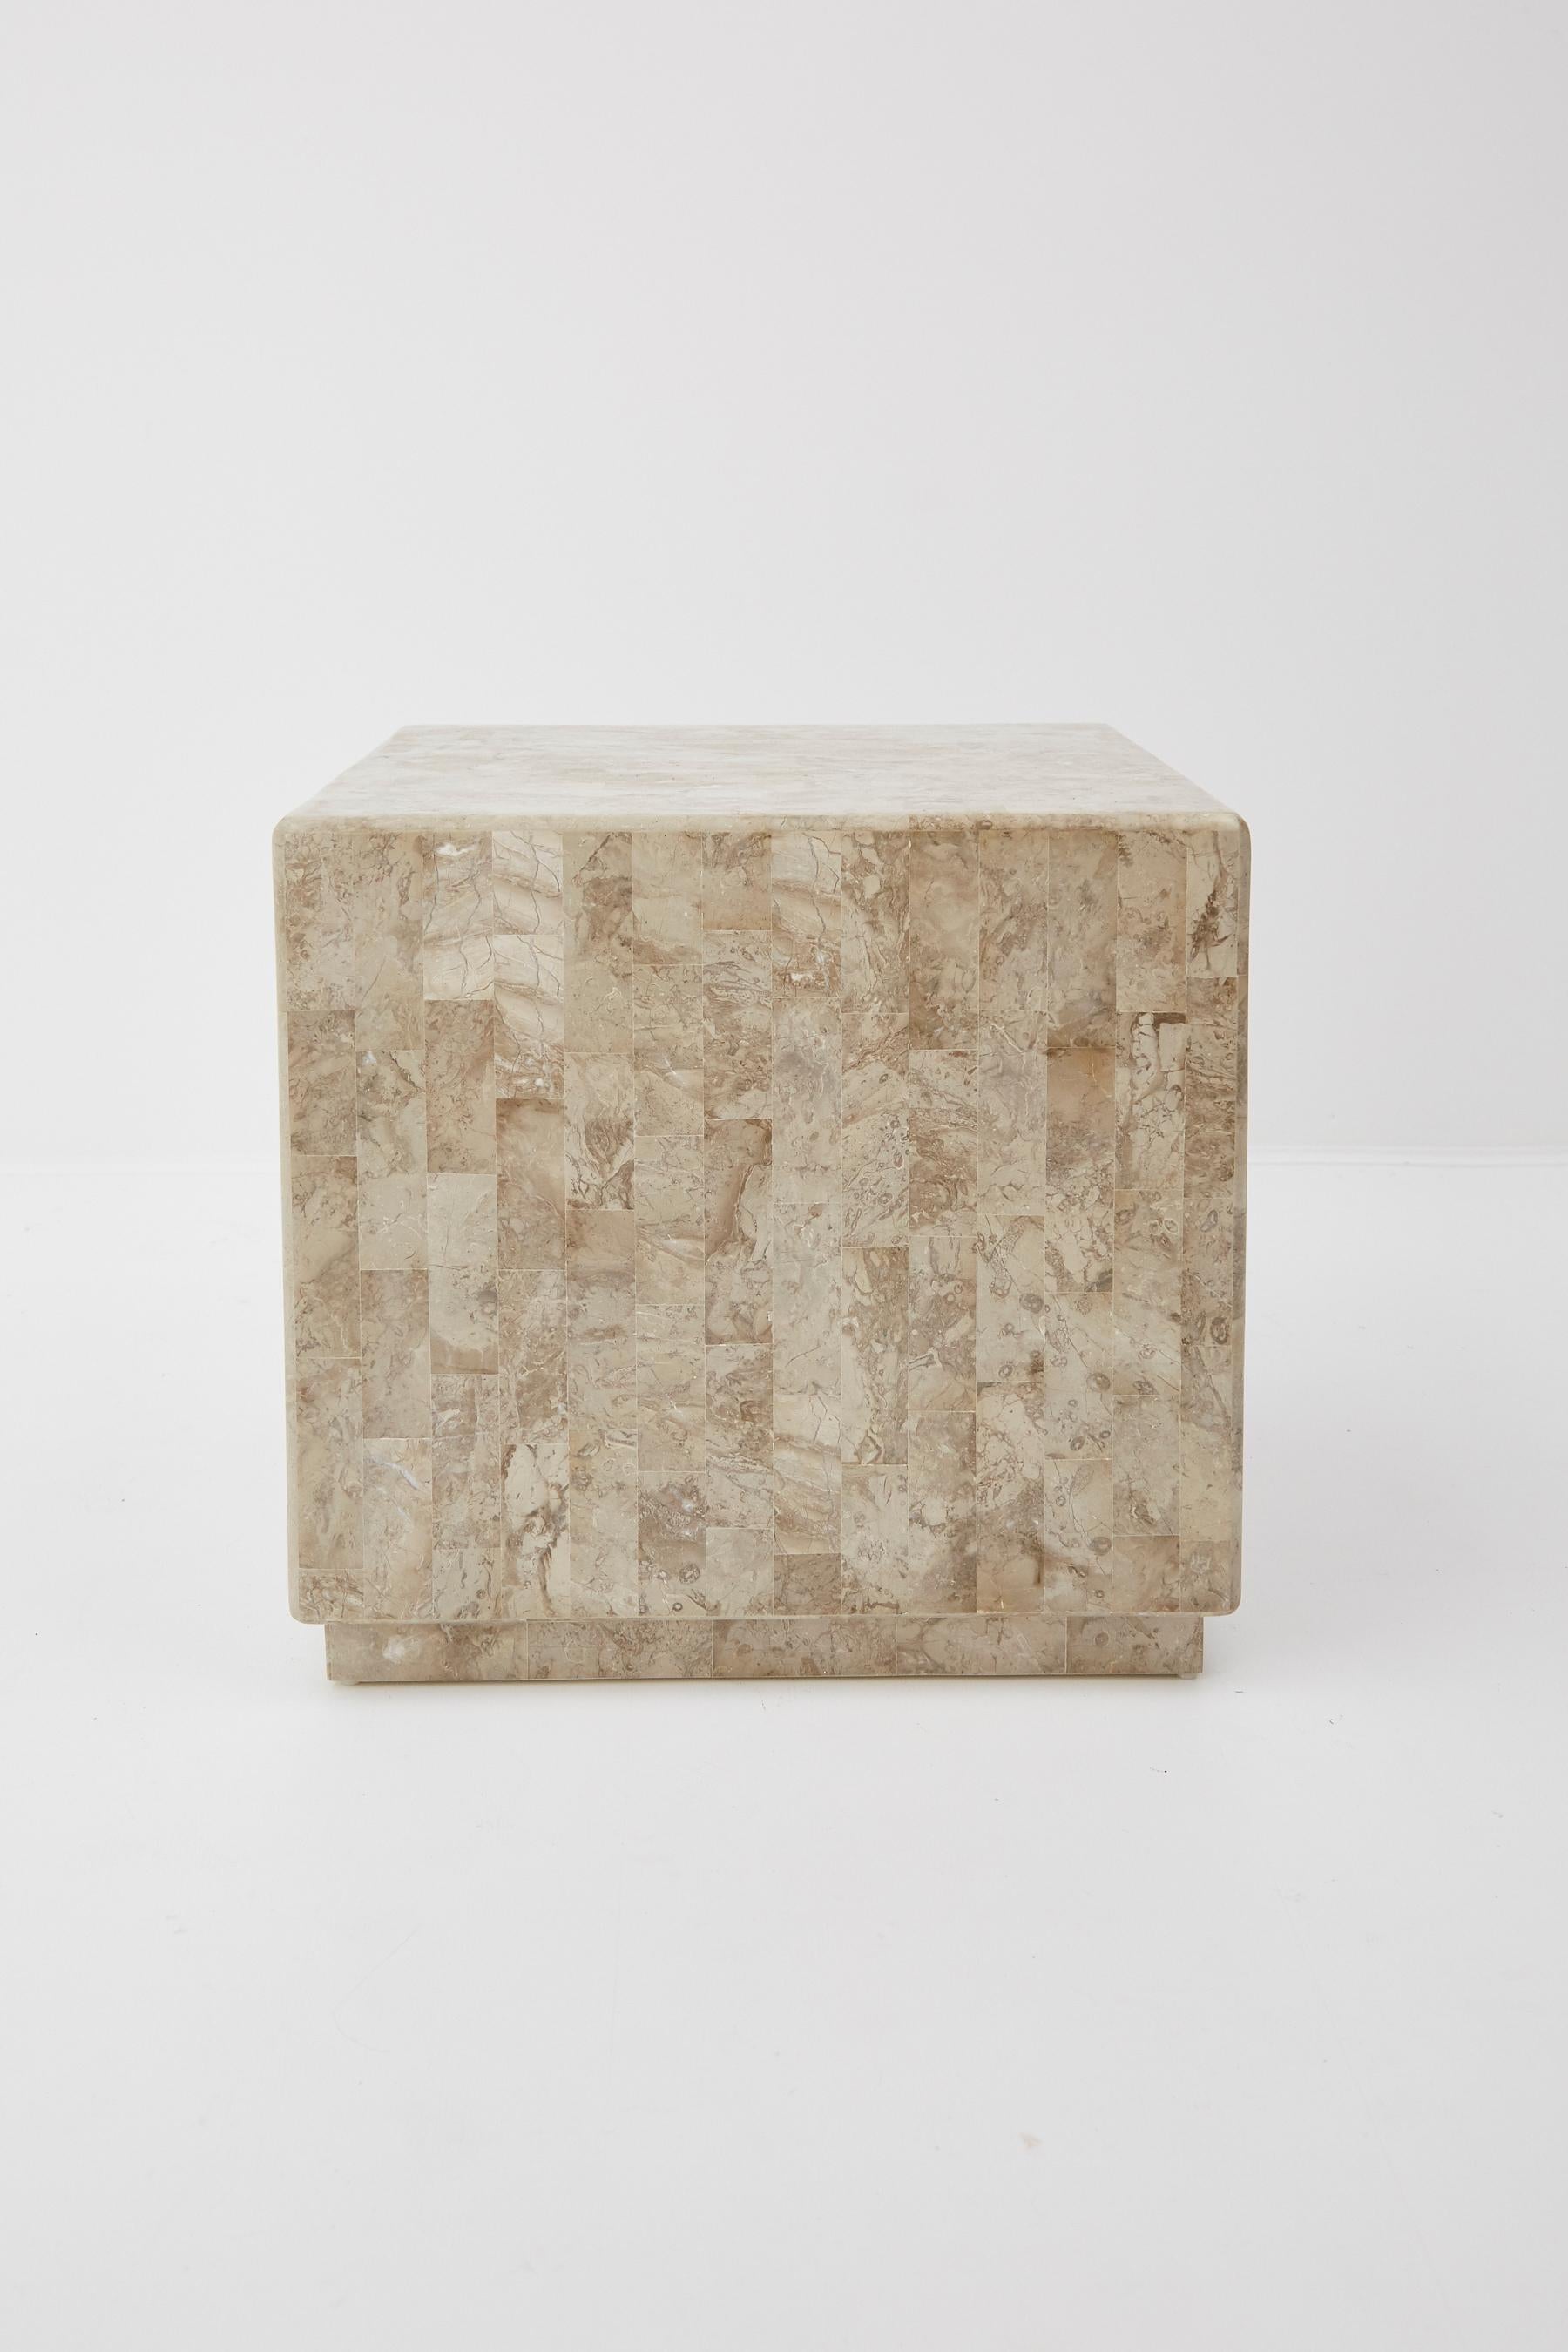 Cube-shaped side table completely covered in natural tessellated cantor stone.

All furnishings are made from 100% natural Fossil Stone or Seashell inlay, carefully hand cut and crafted piece-by-piece and precisely inlaid to the form of the final